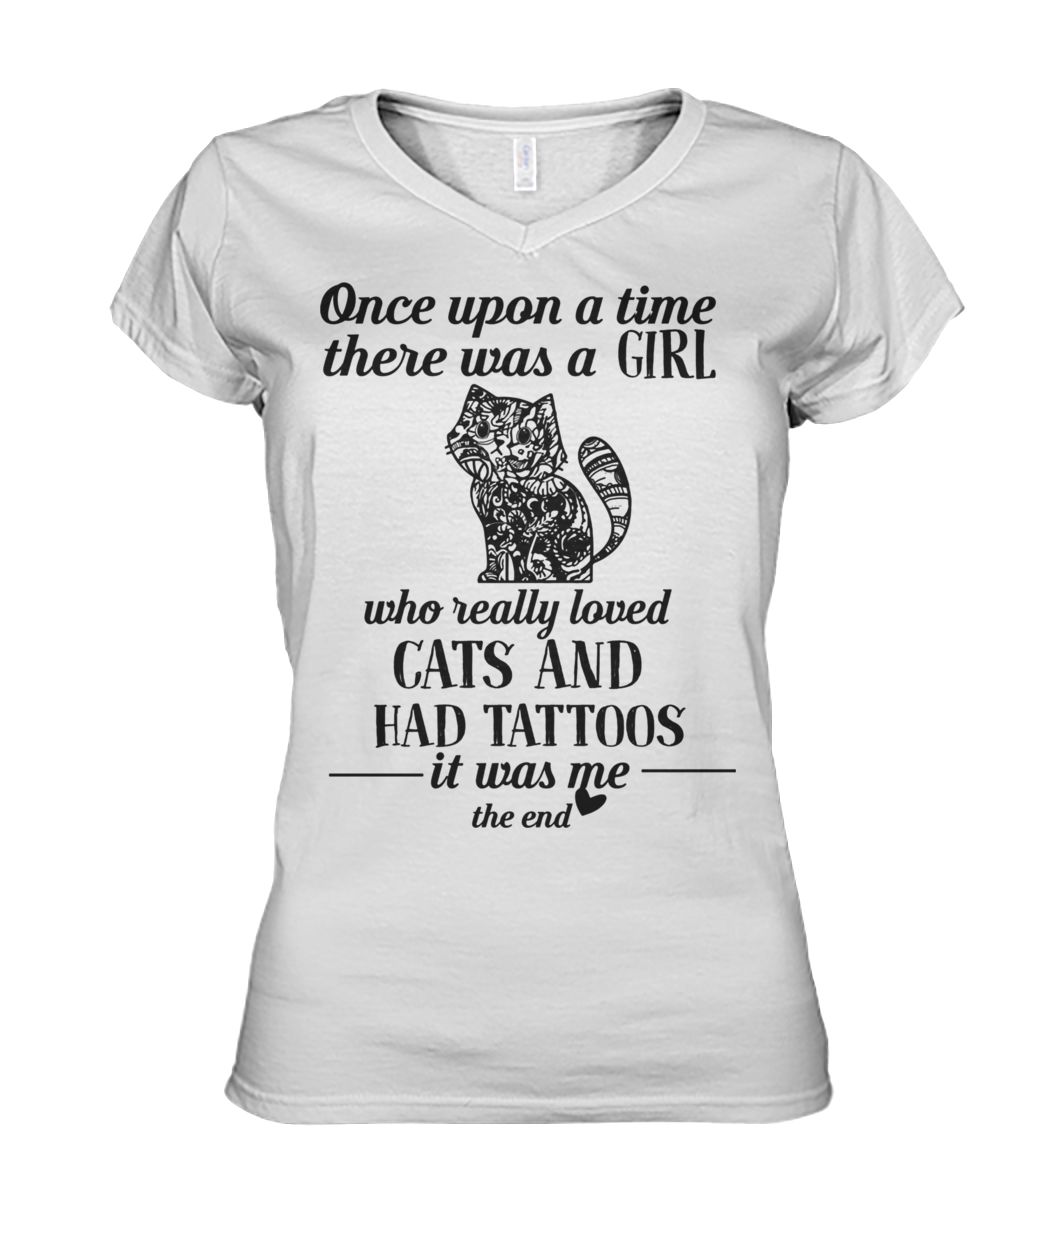 Once upon a time there was a girl who really loved cats and had tattoos it was me women's v-neck